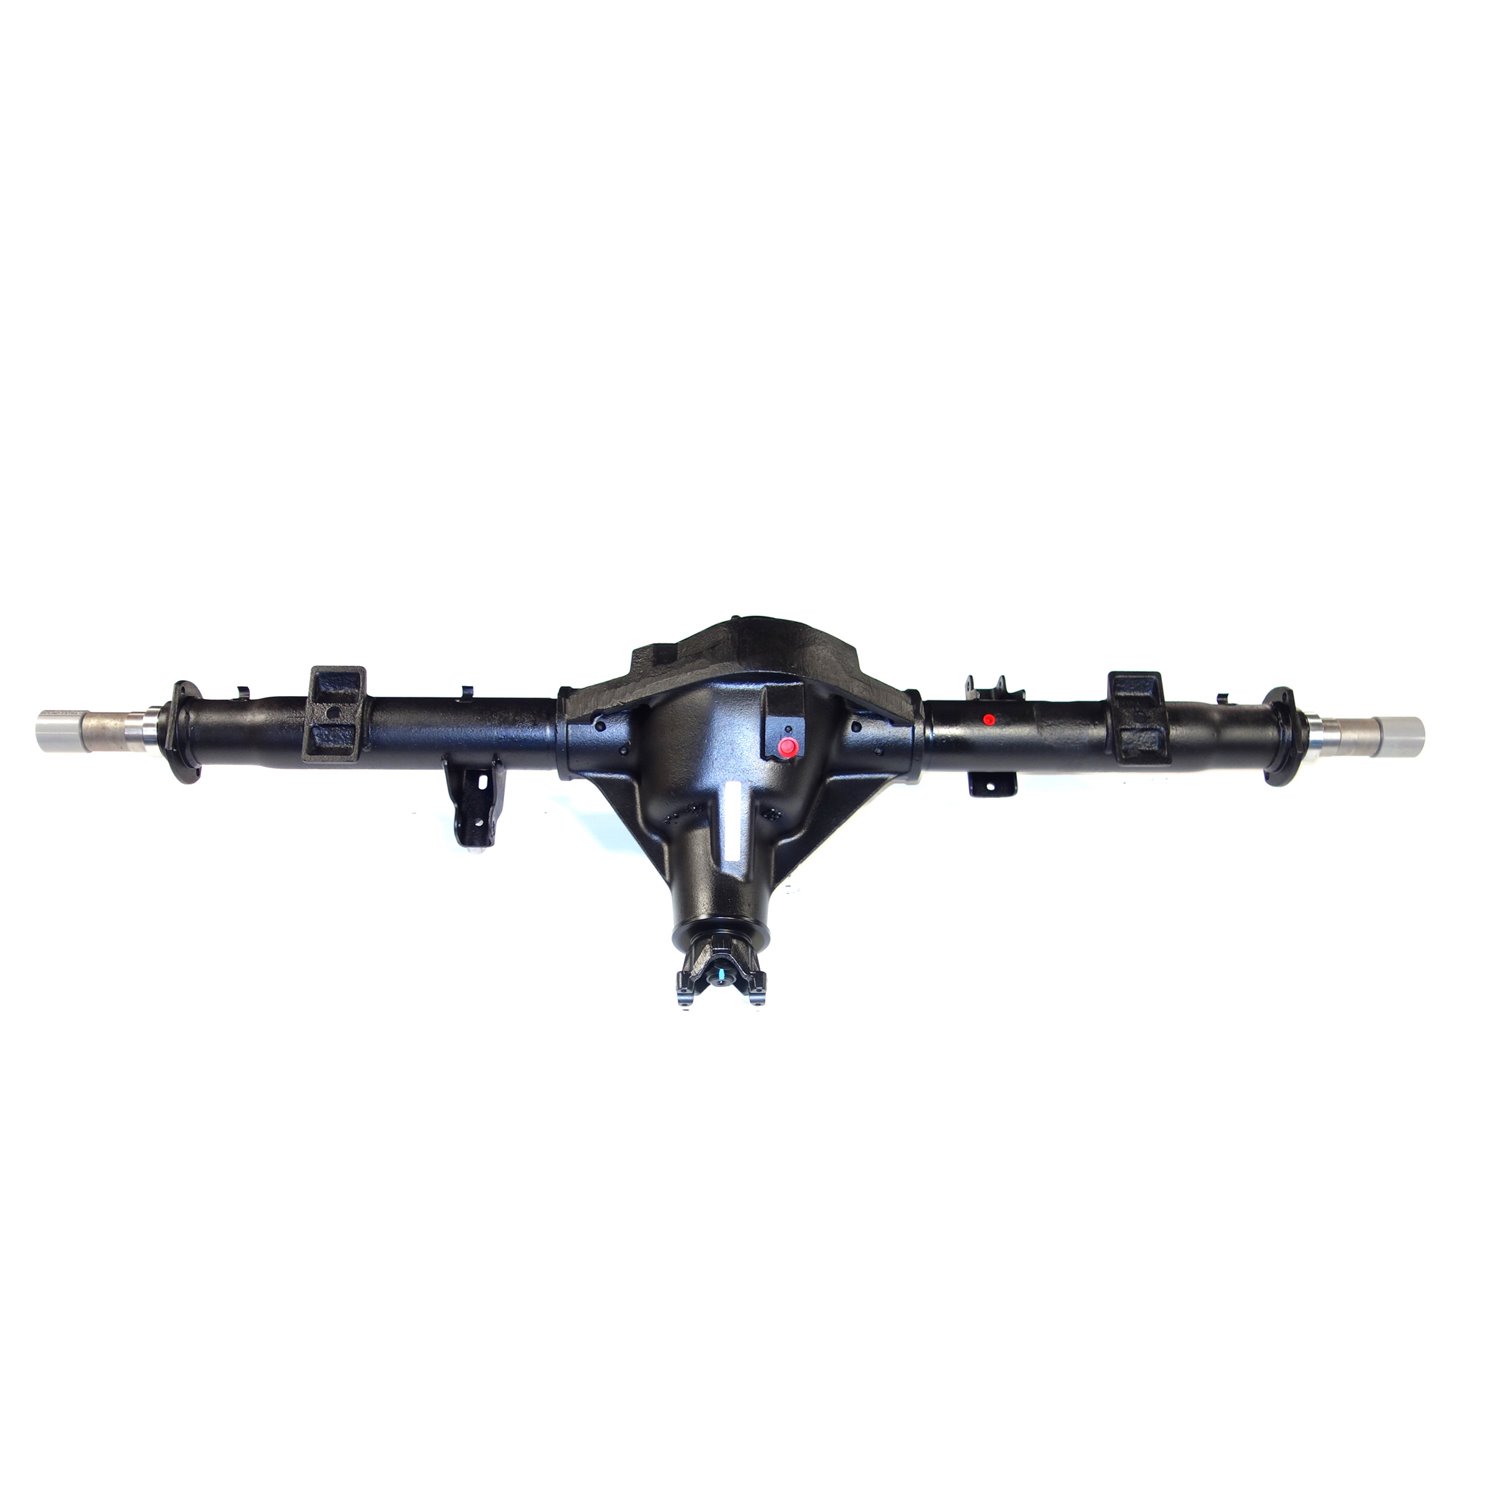 Remanufactured Complete Axle Assembly for Dana 80 96-99 Dodge Ram 3500 4.11 Ratio, 2wd